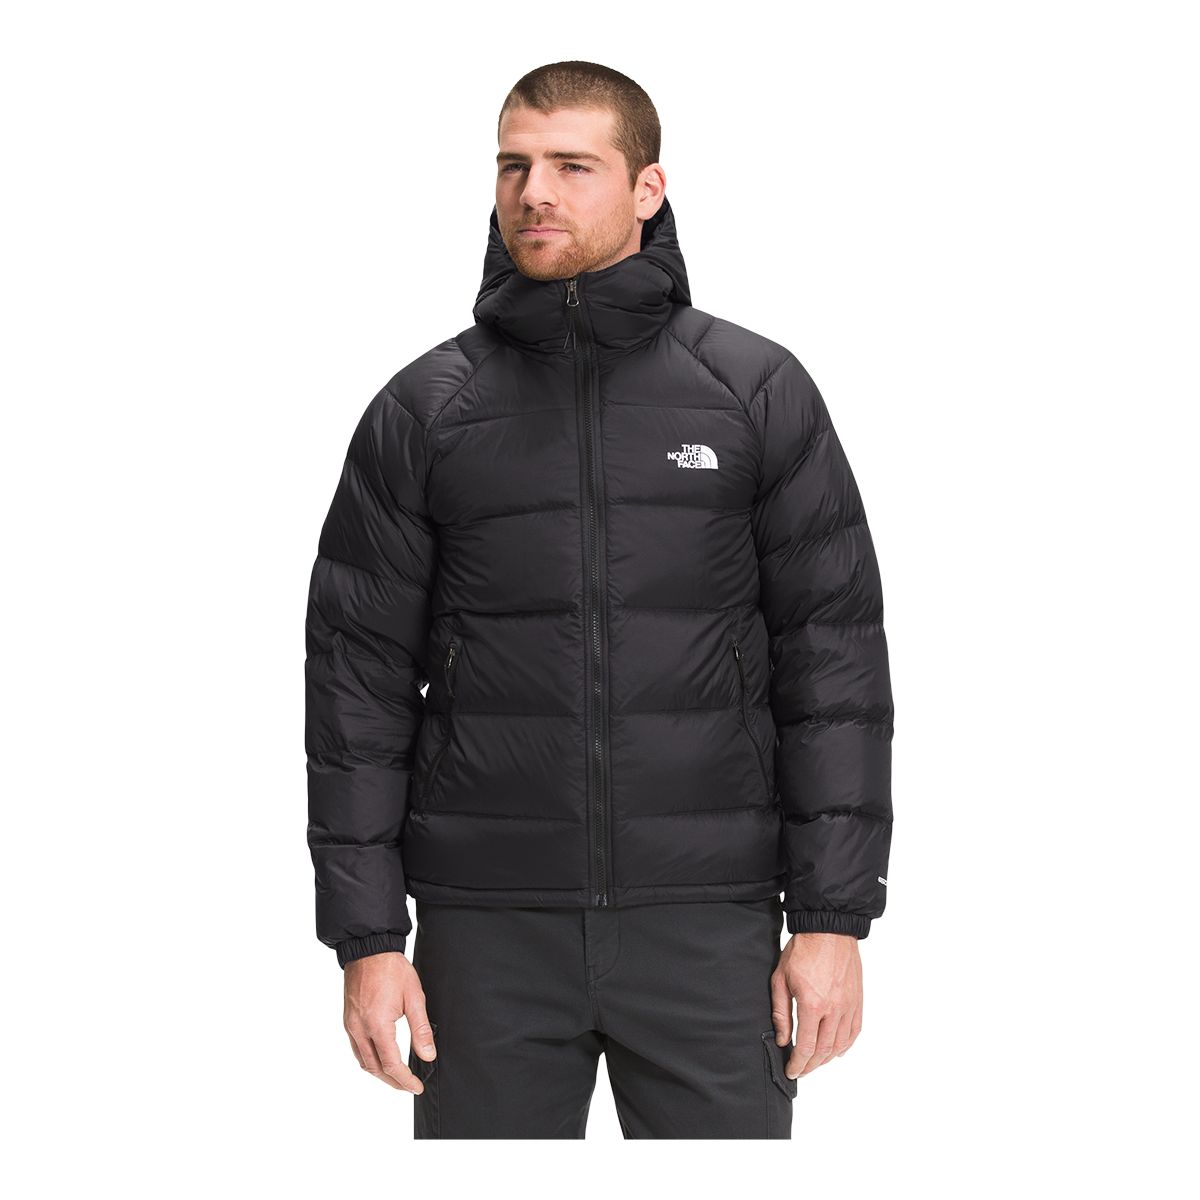 The North Face Men's Hydrenalite Down Jacket